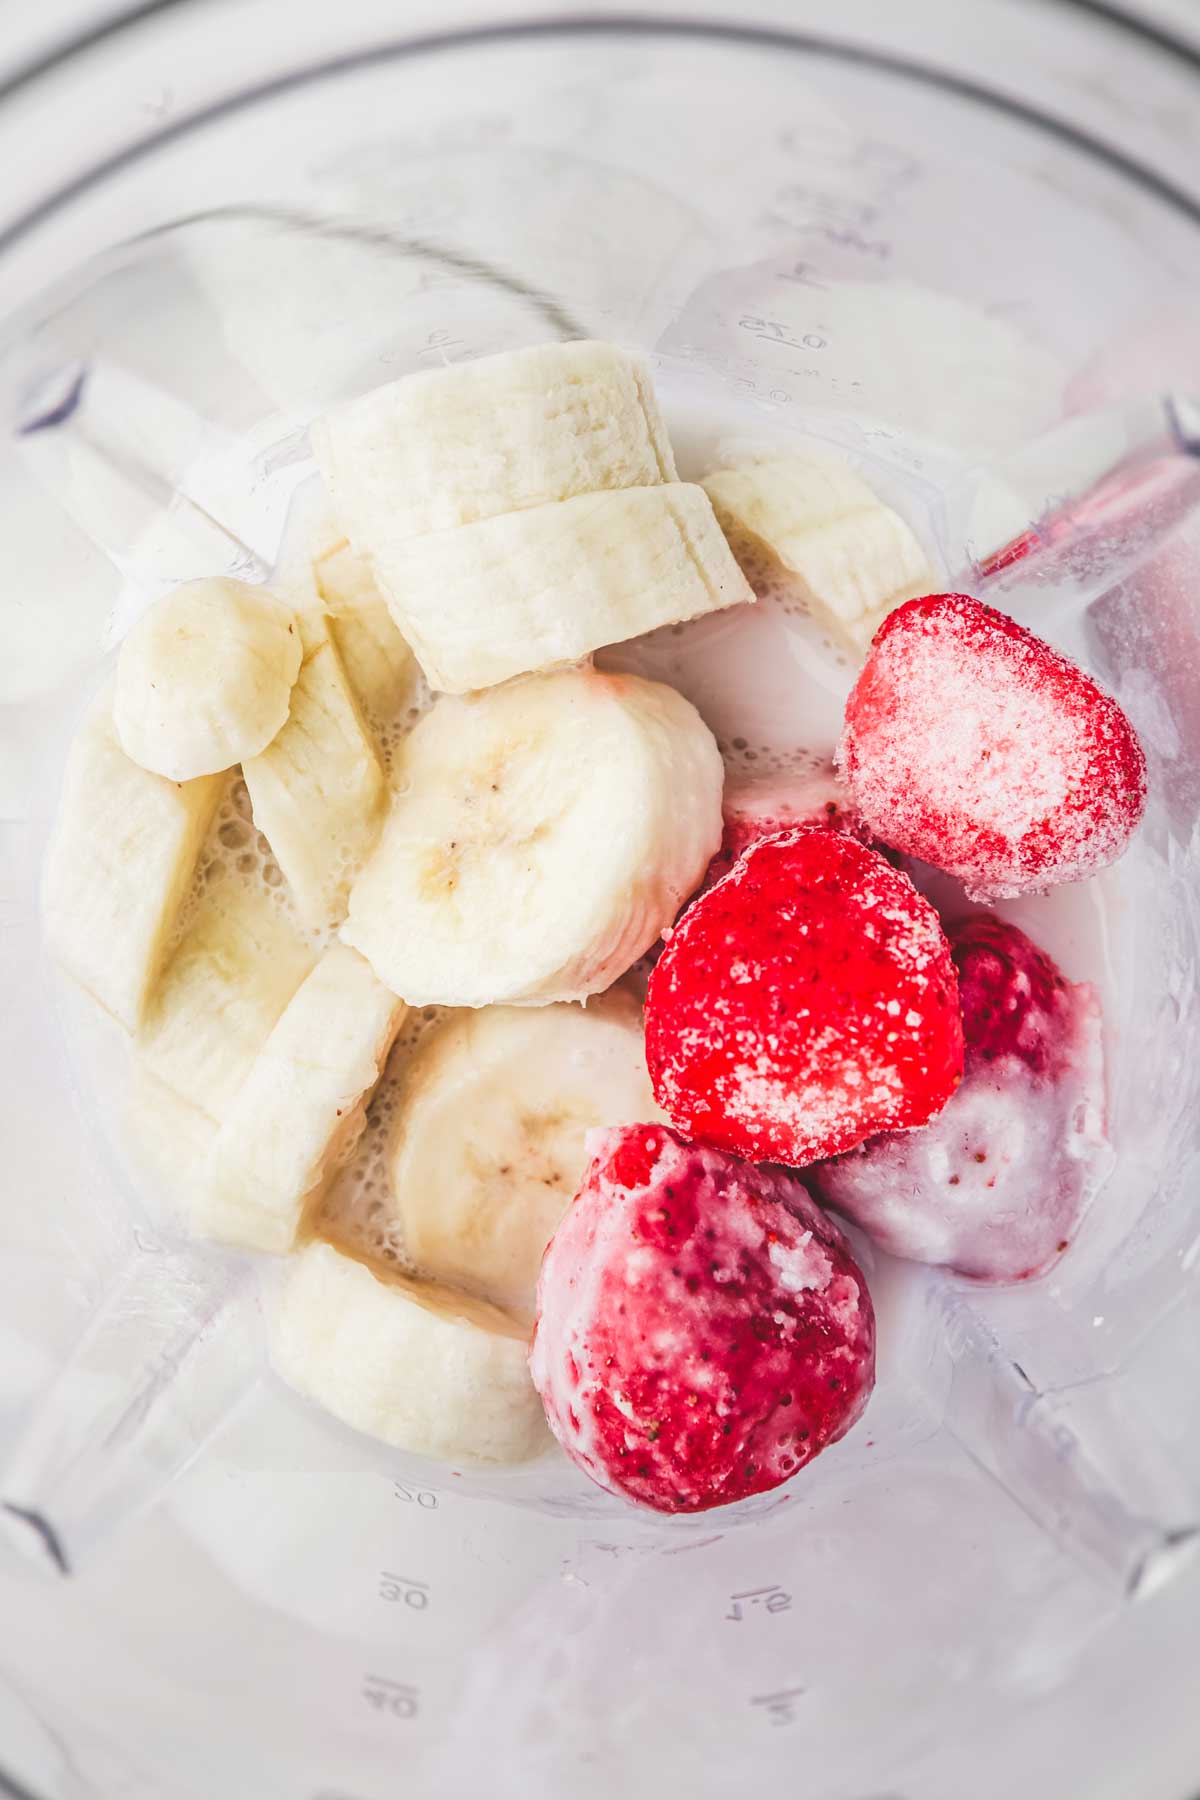 Blender with banana and strawberry